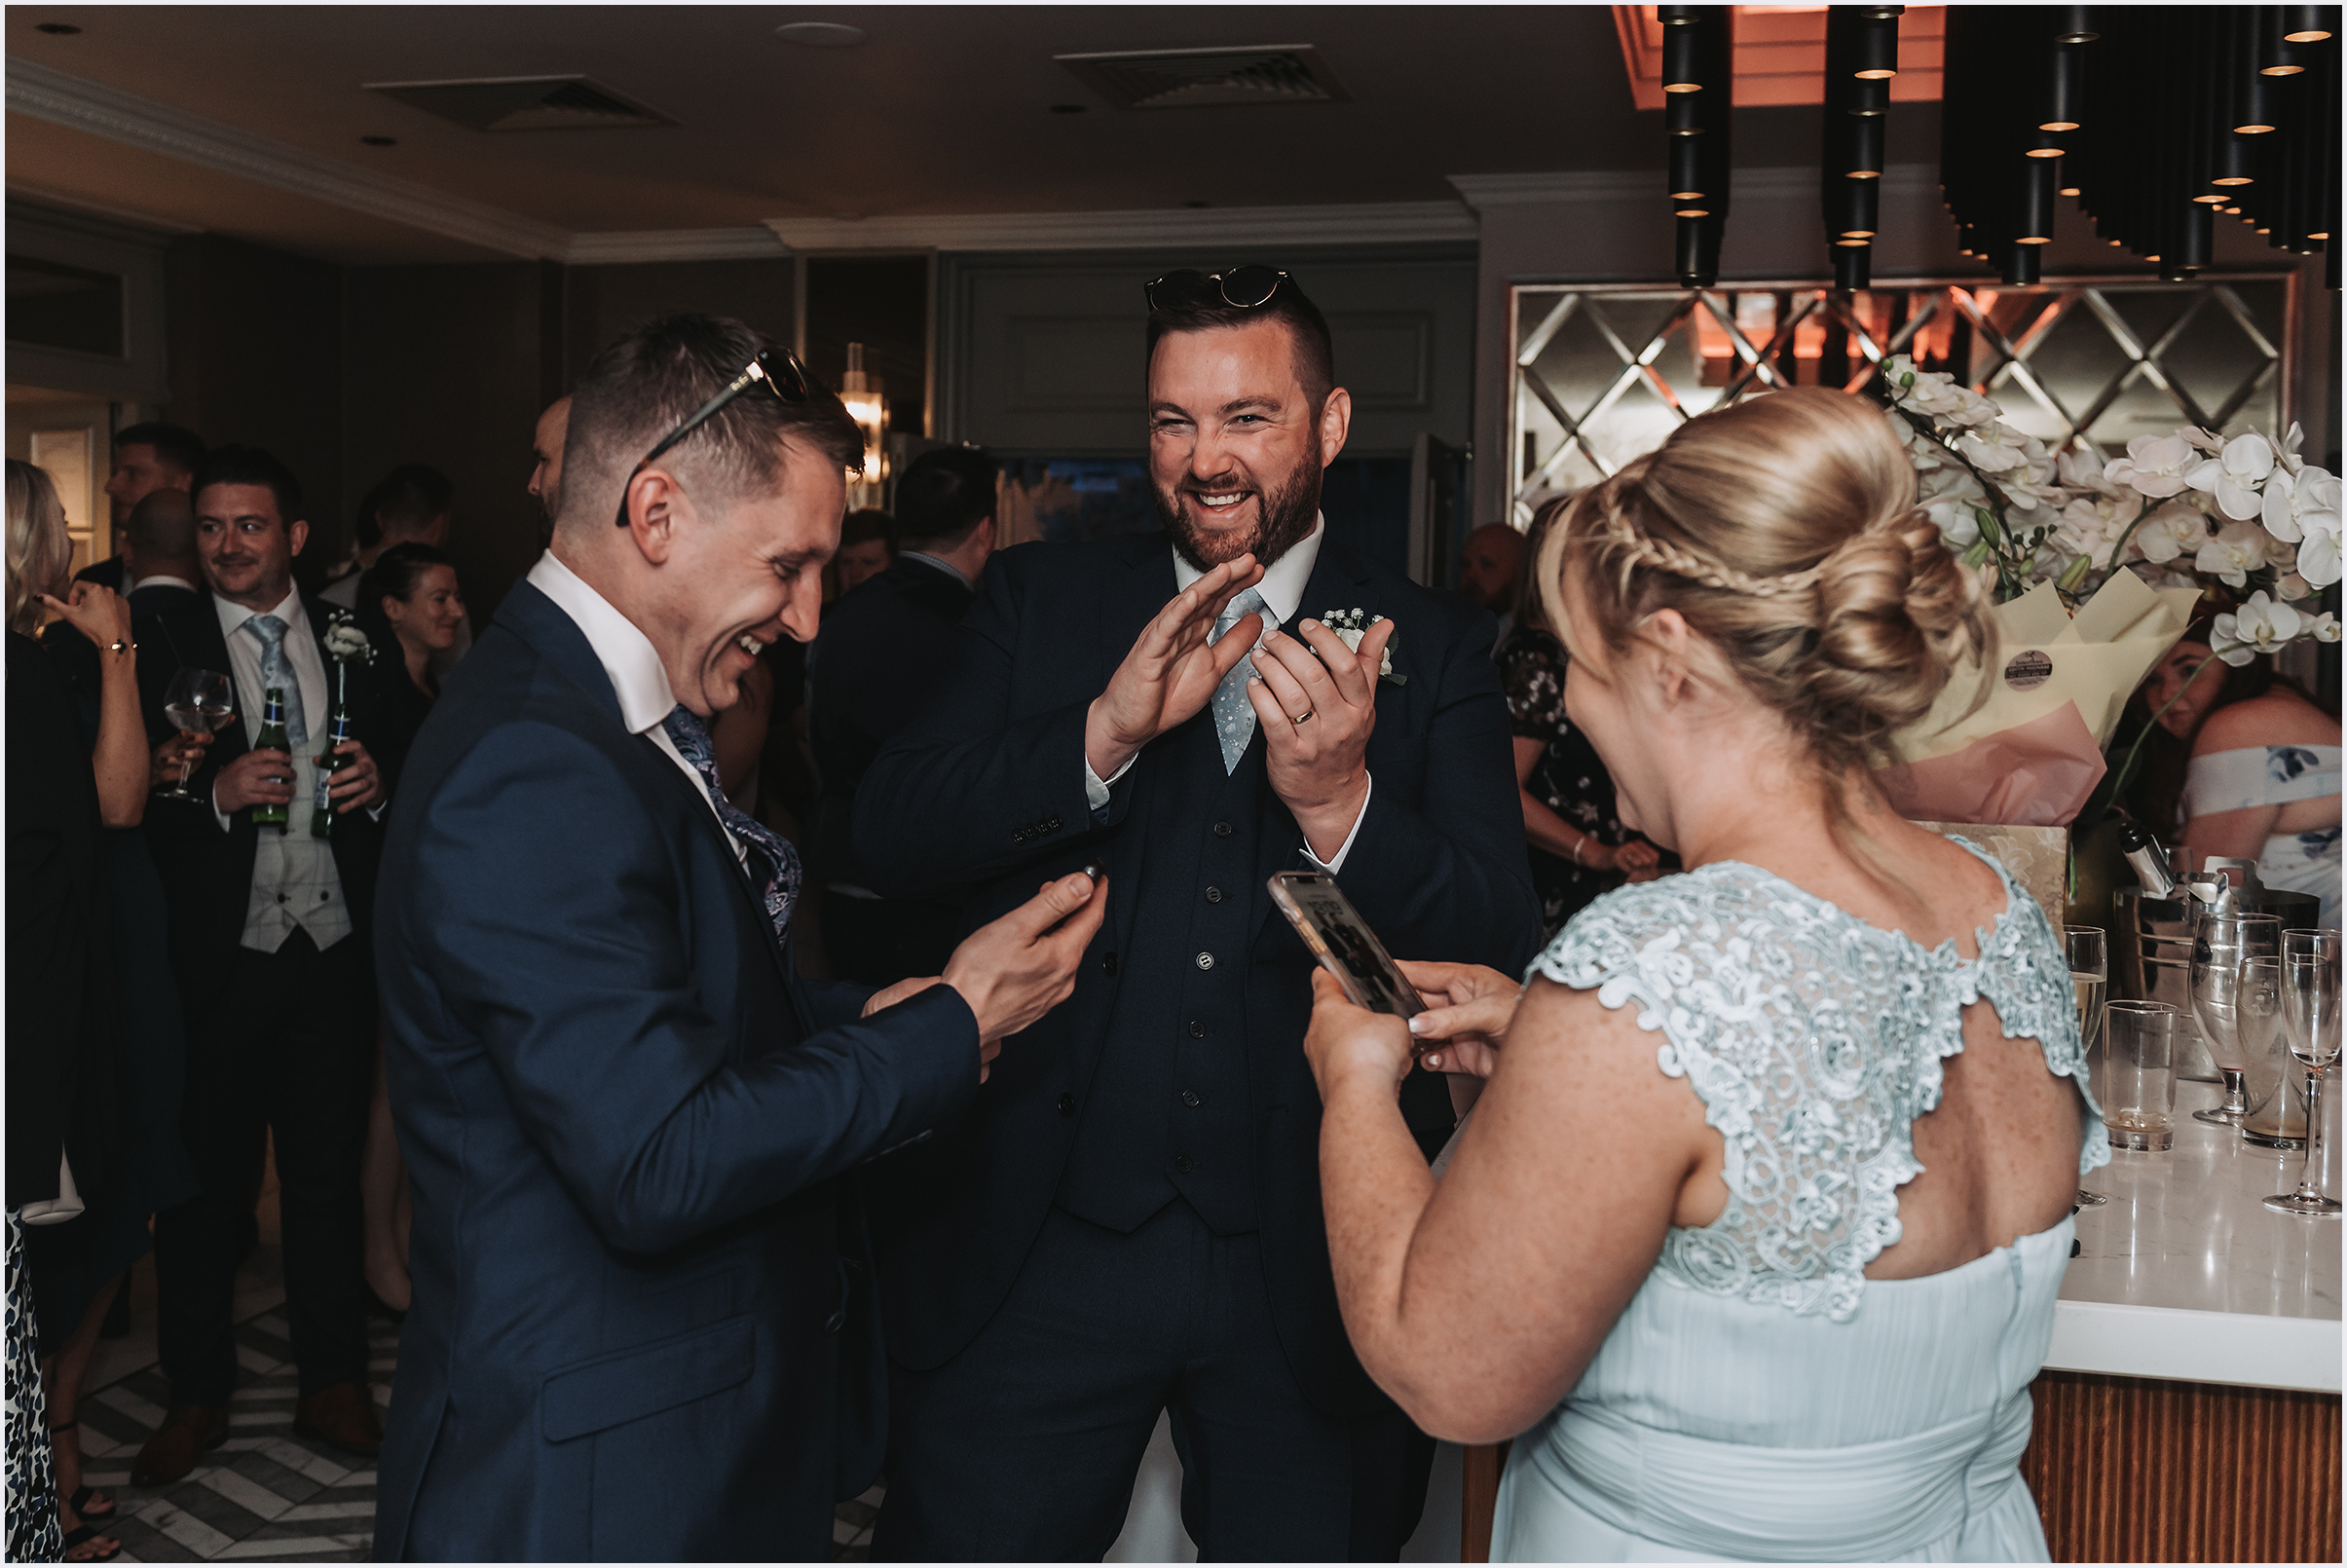 Wedding guests joking around during the drinks reception at The Grosvenor Pulford Hotel and Spa.